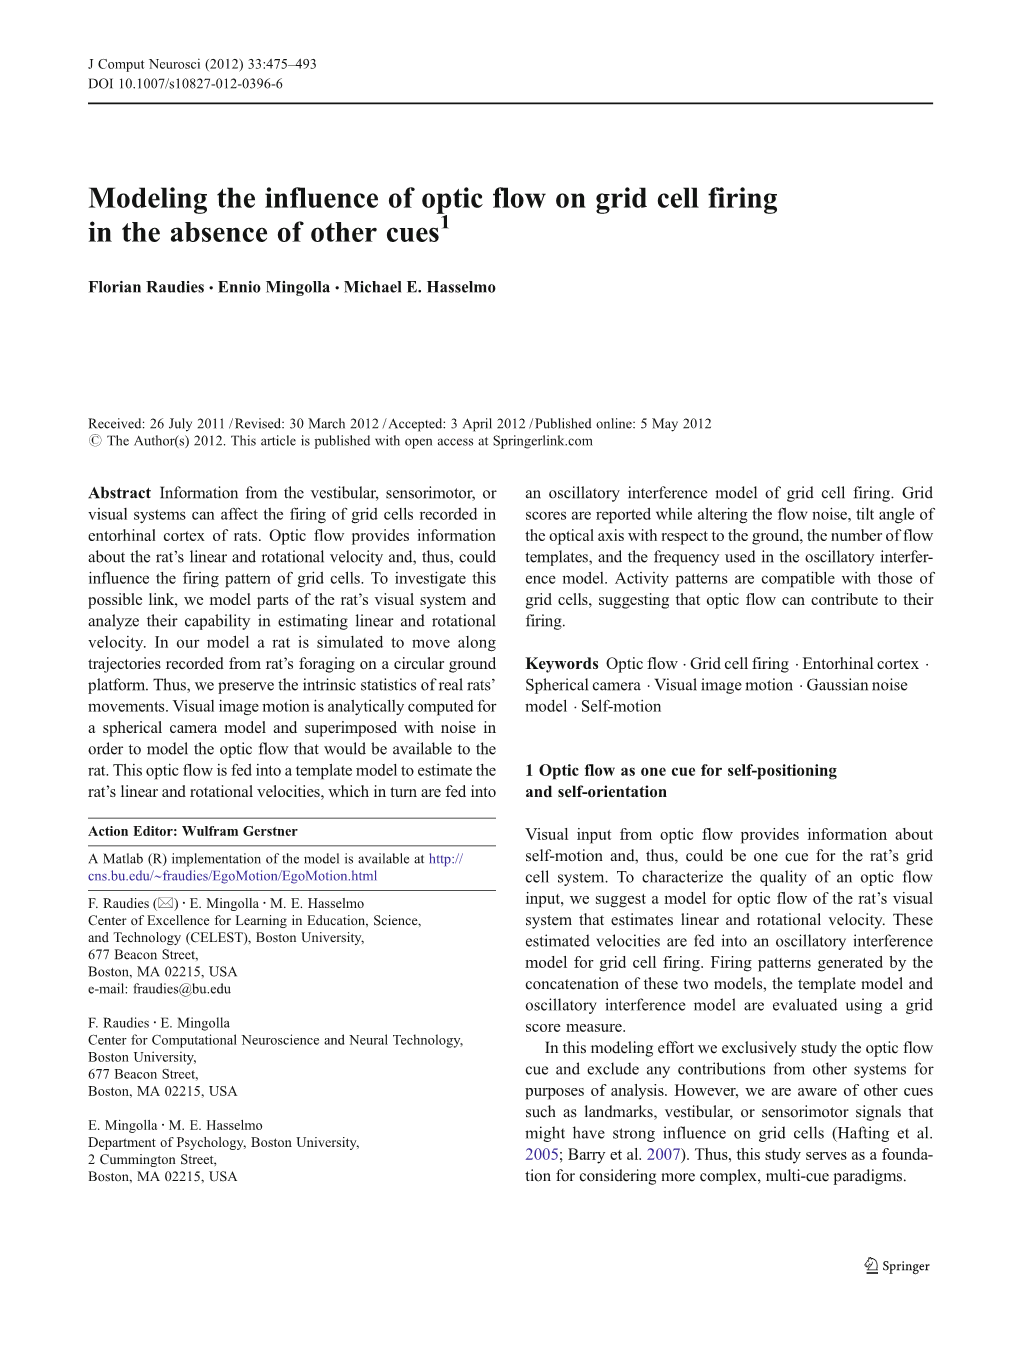 Modeling the Influence of Optic Flow on Grid Cell Firing in the Absence of Other Cues1